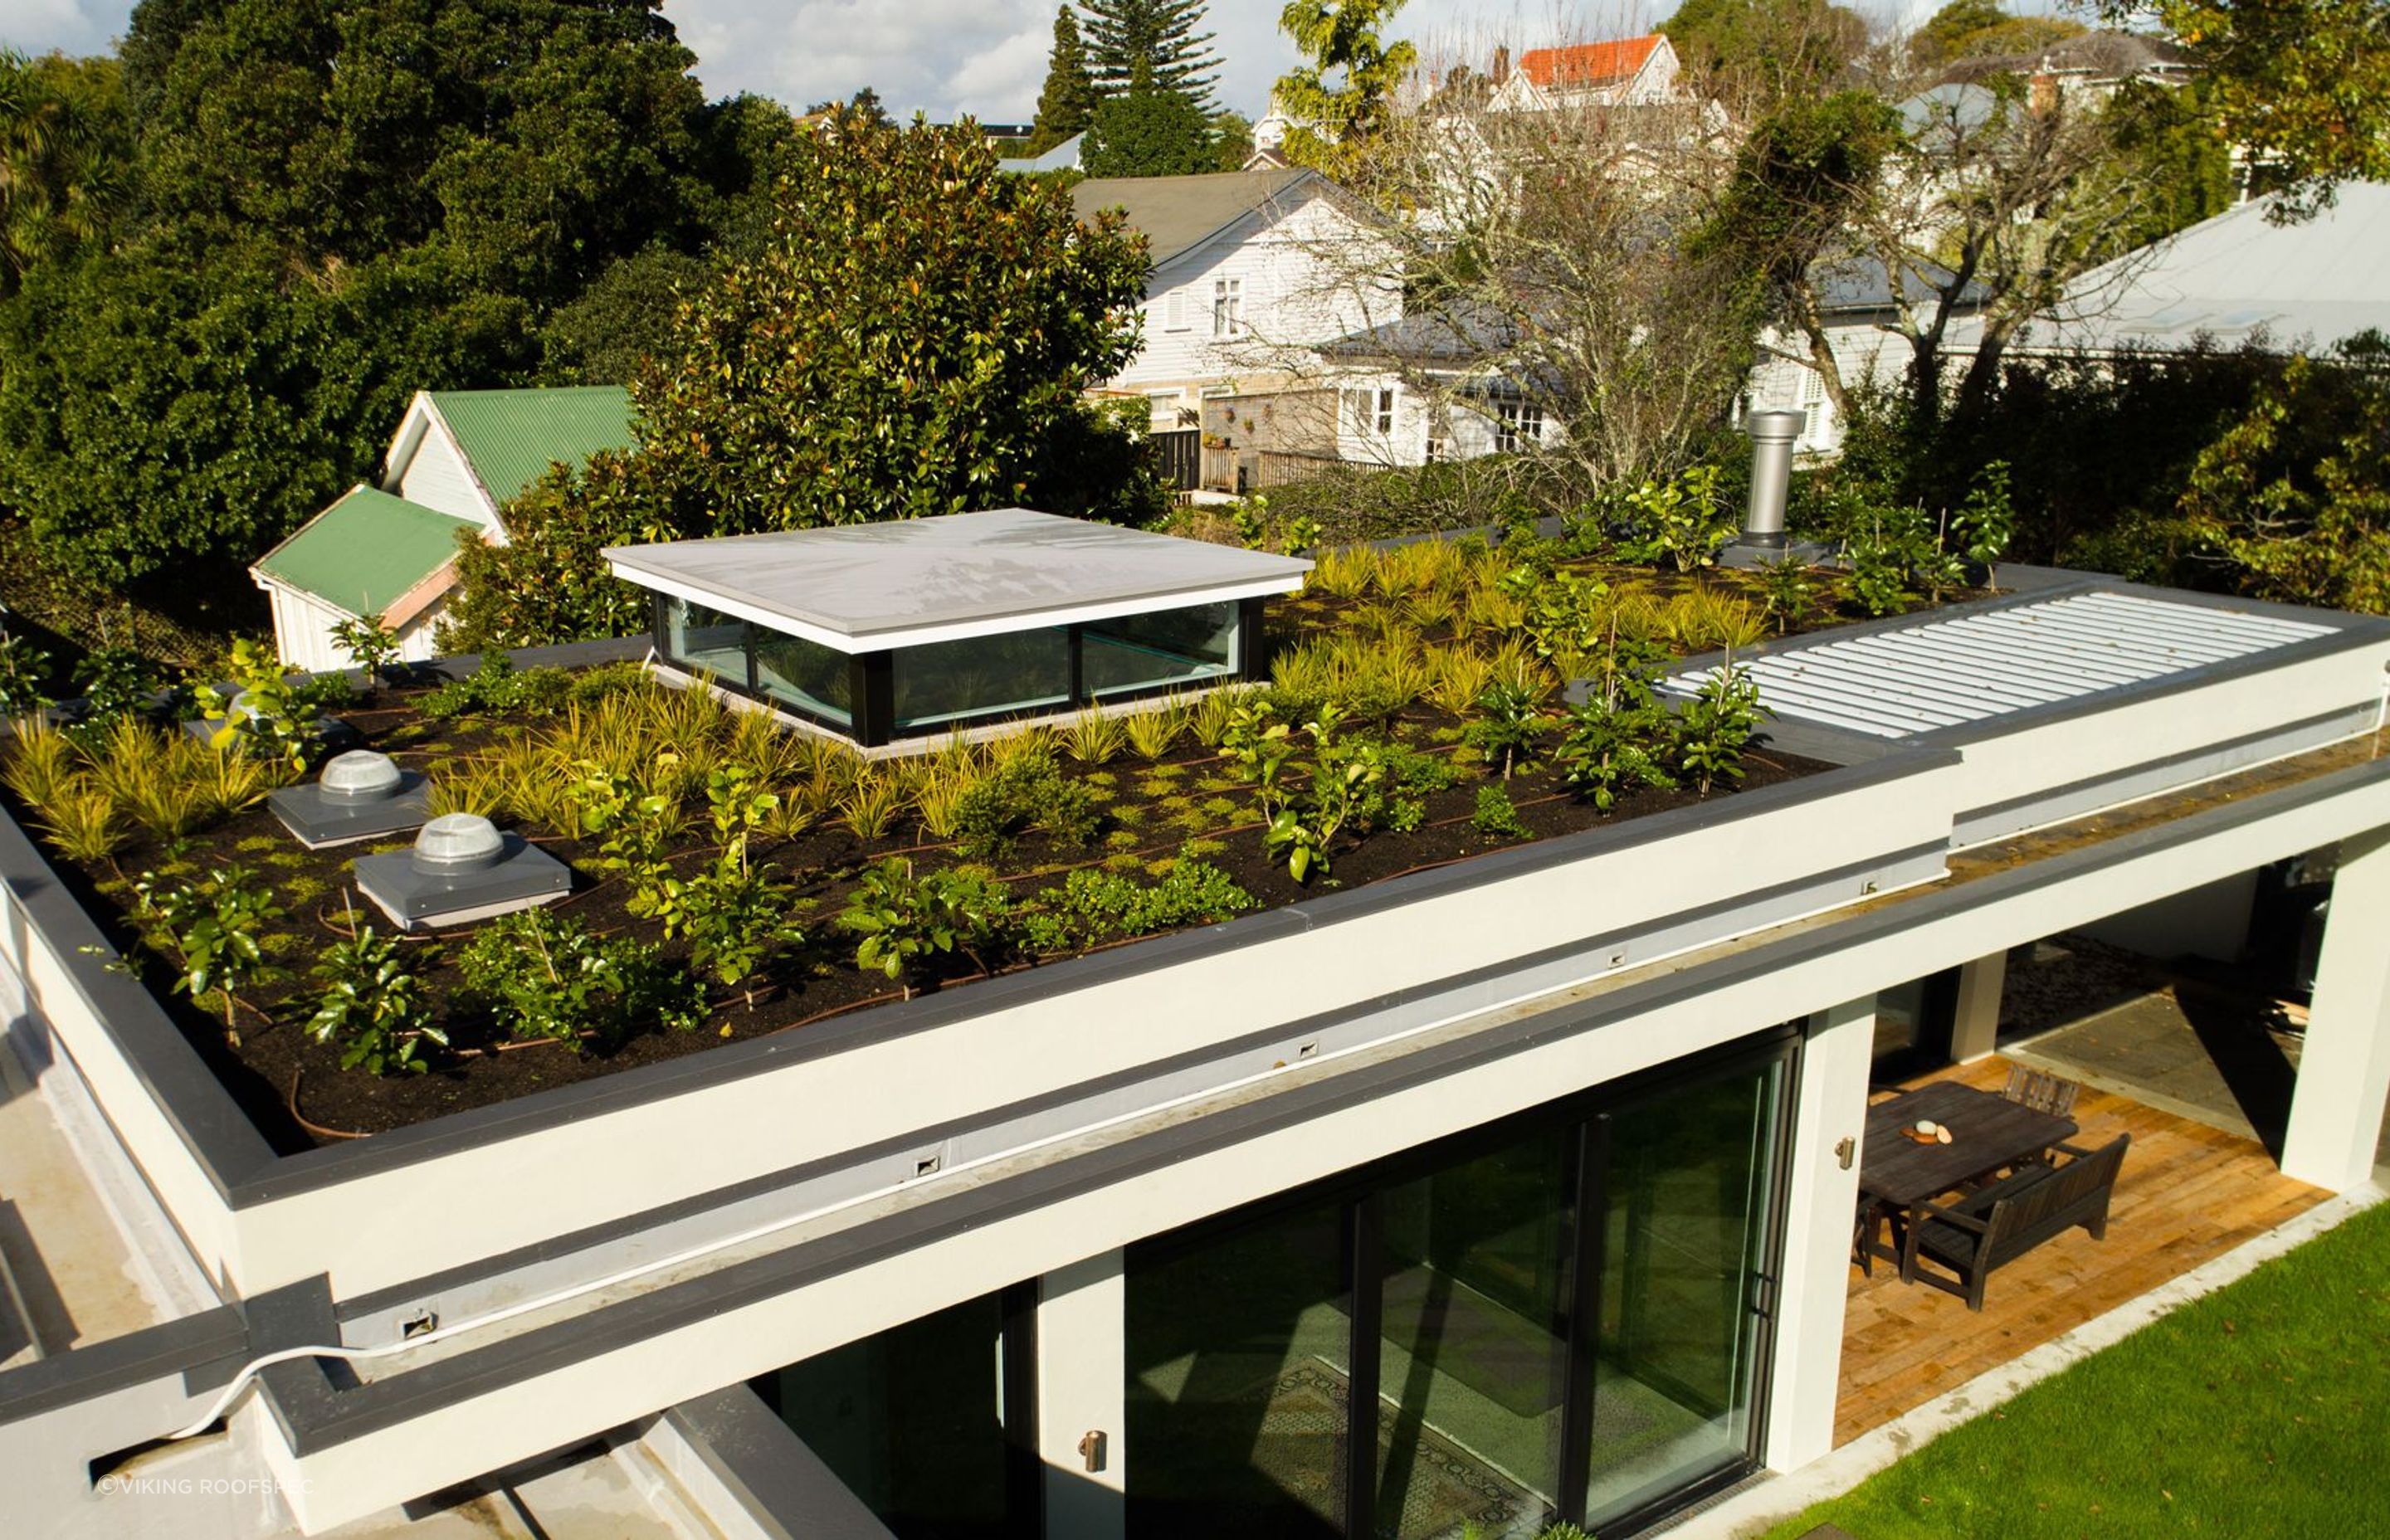 A green roof, like this one from Viking Roofspec, can add colour and life to an otherwise plain part of the home.